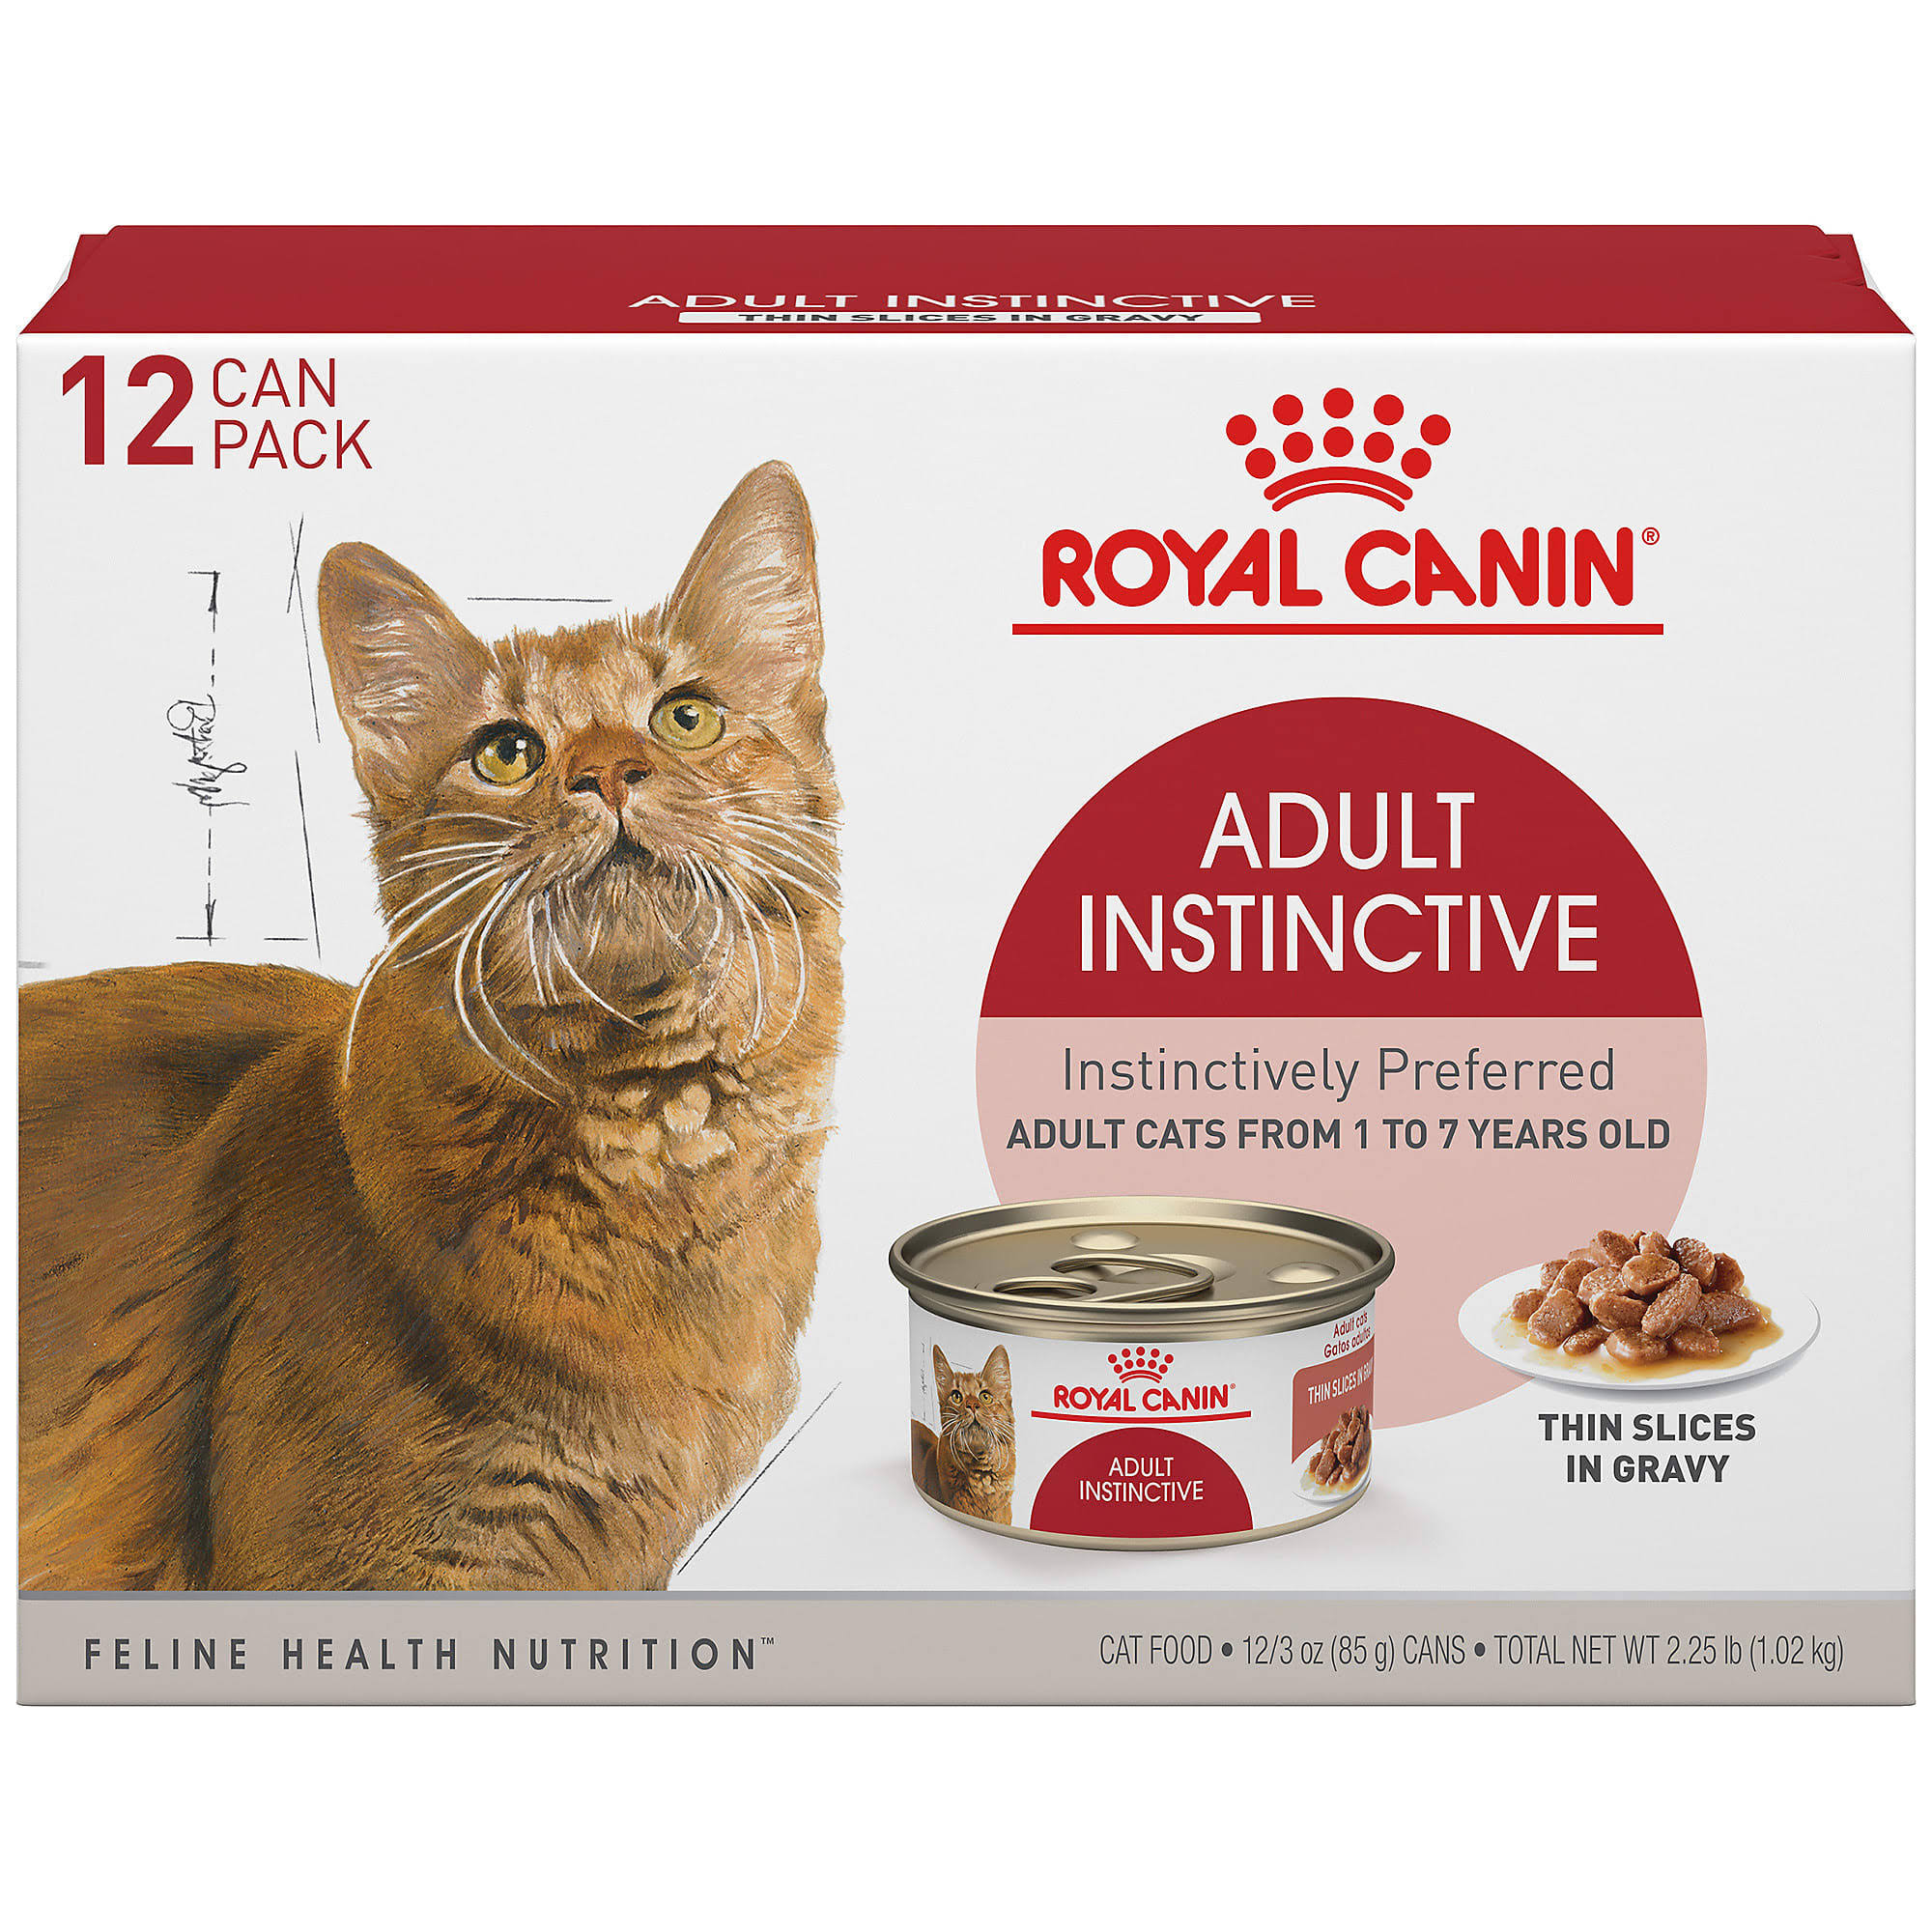 Royal Canin Feline Health Nutrition Adult Instinctive Thin Slices in Gravy Canned Cat Food (12 Pack), 3 Oz